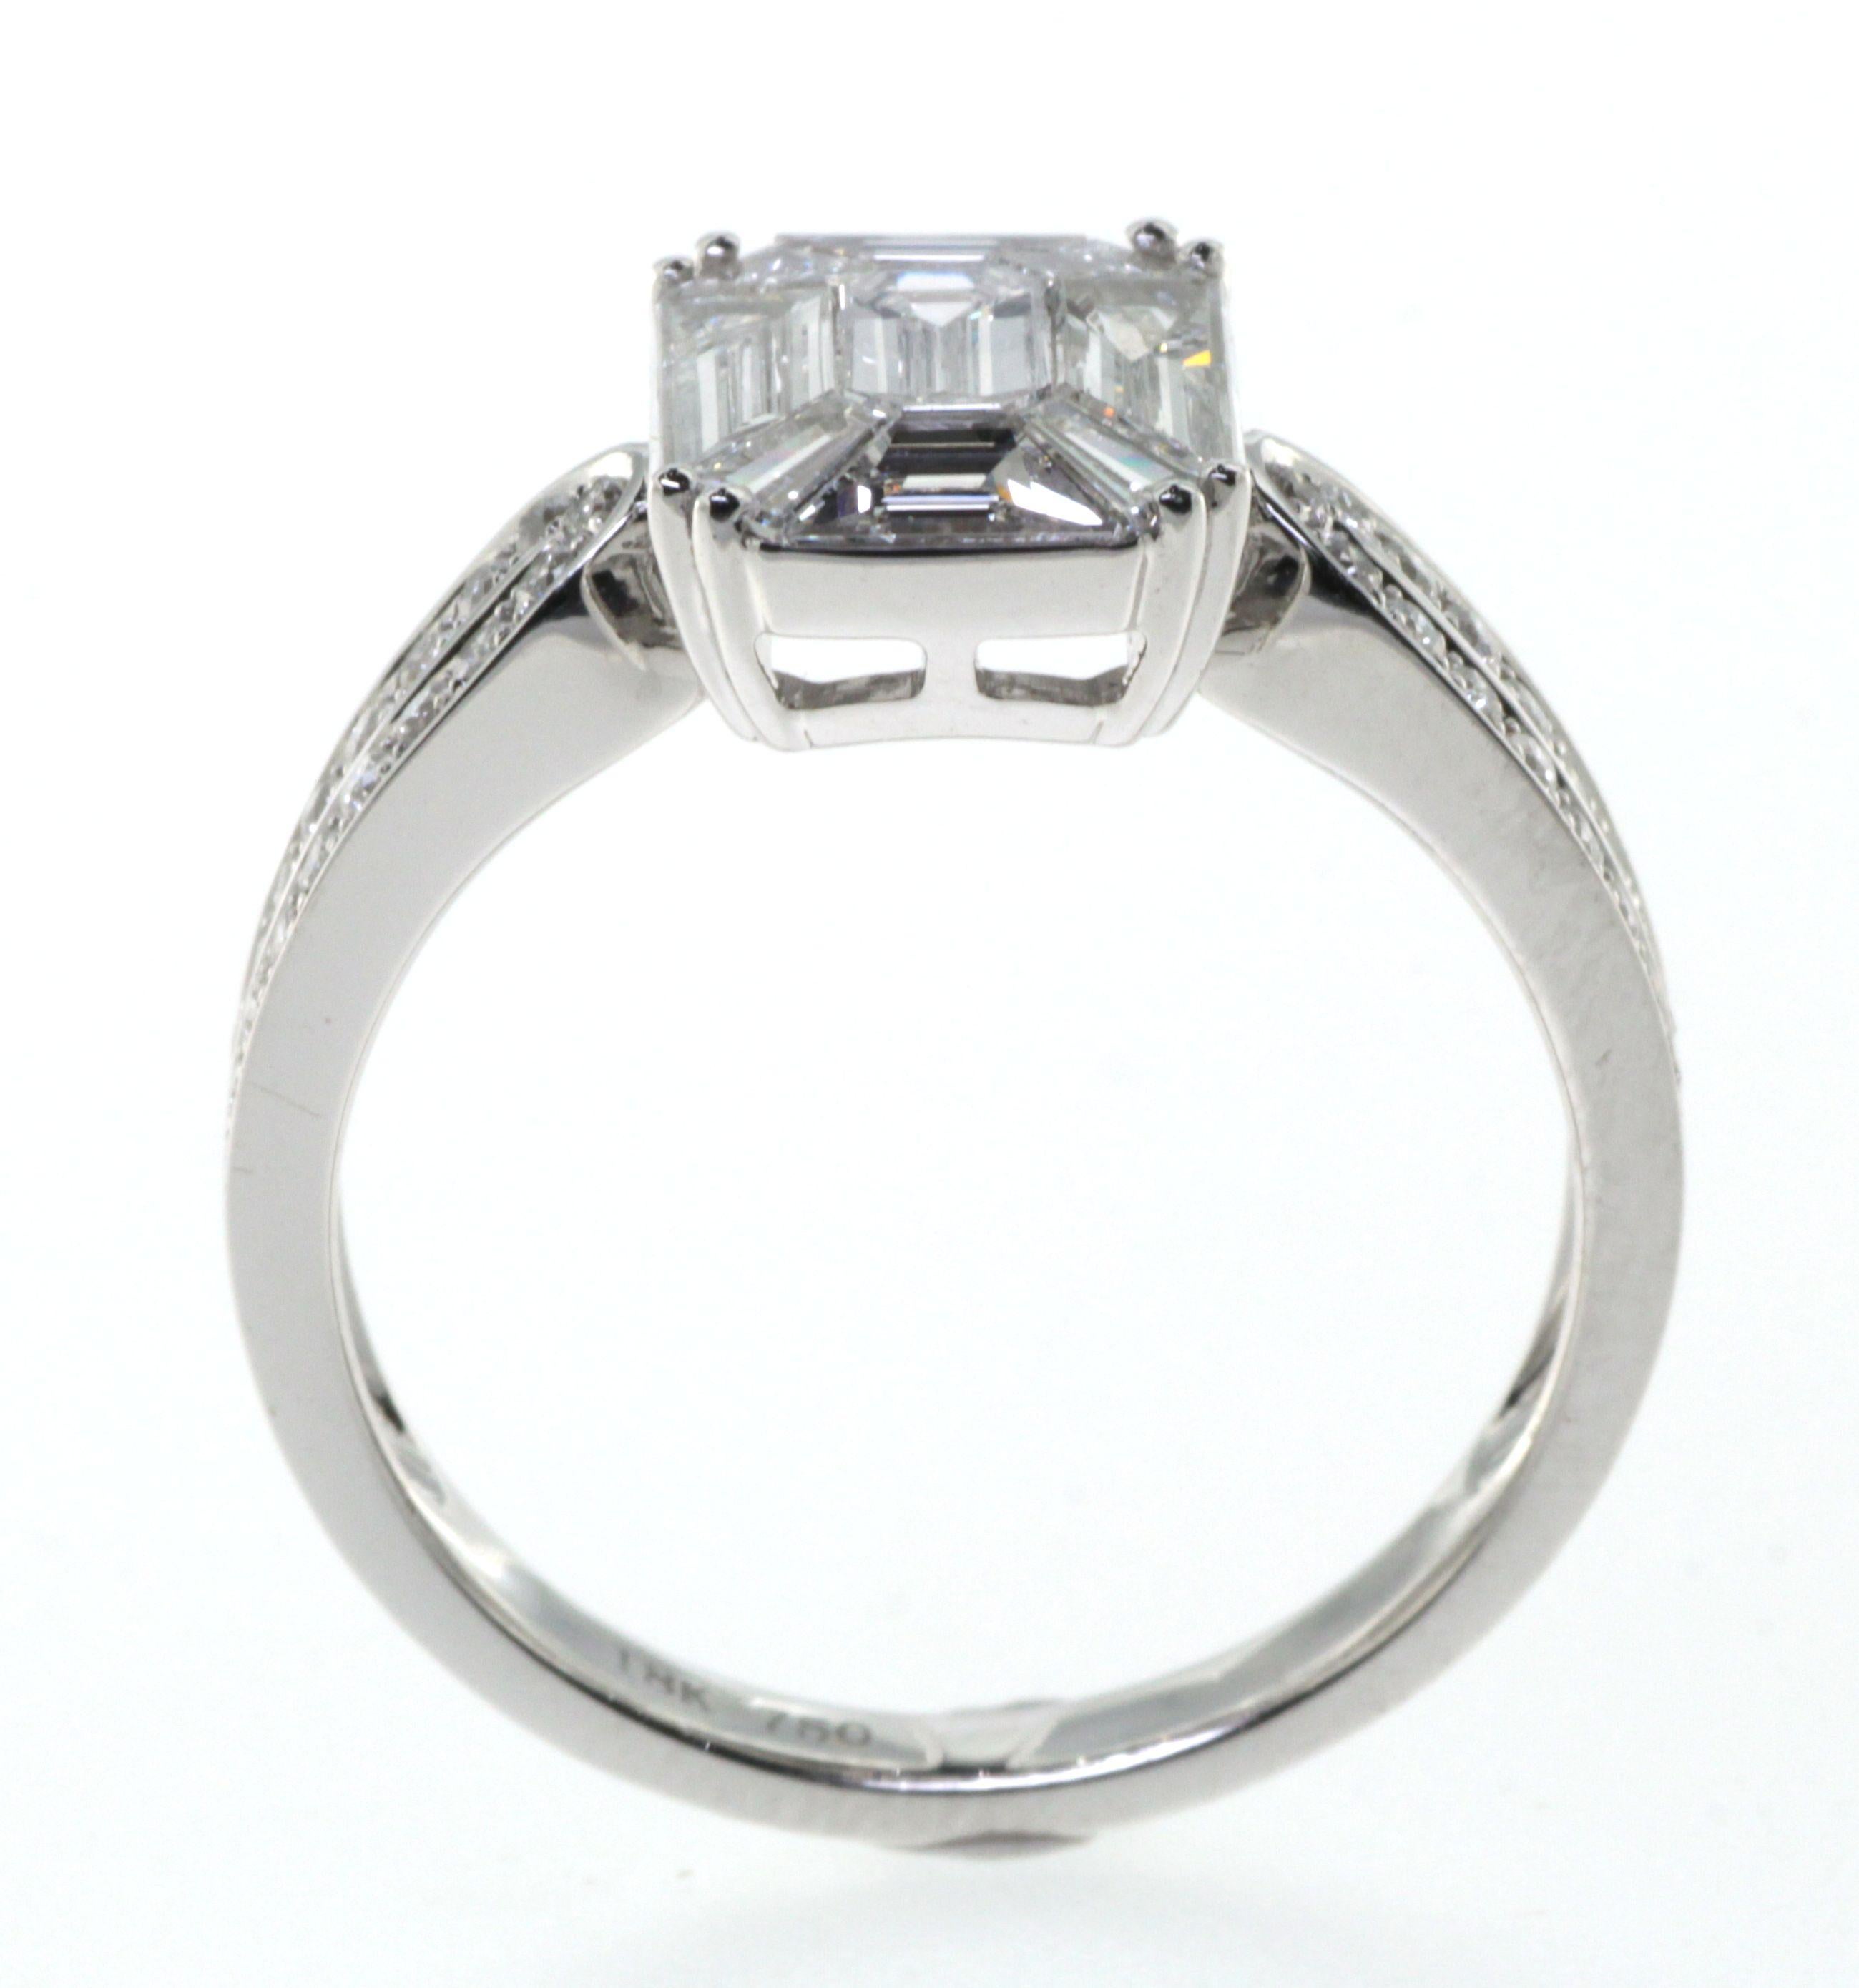 Mixed Cut 1.19 Carat Illusion Setting Diamonds Ring in 18K White Gold For Sale